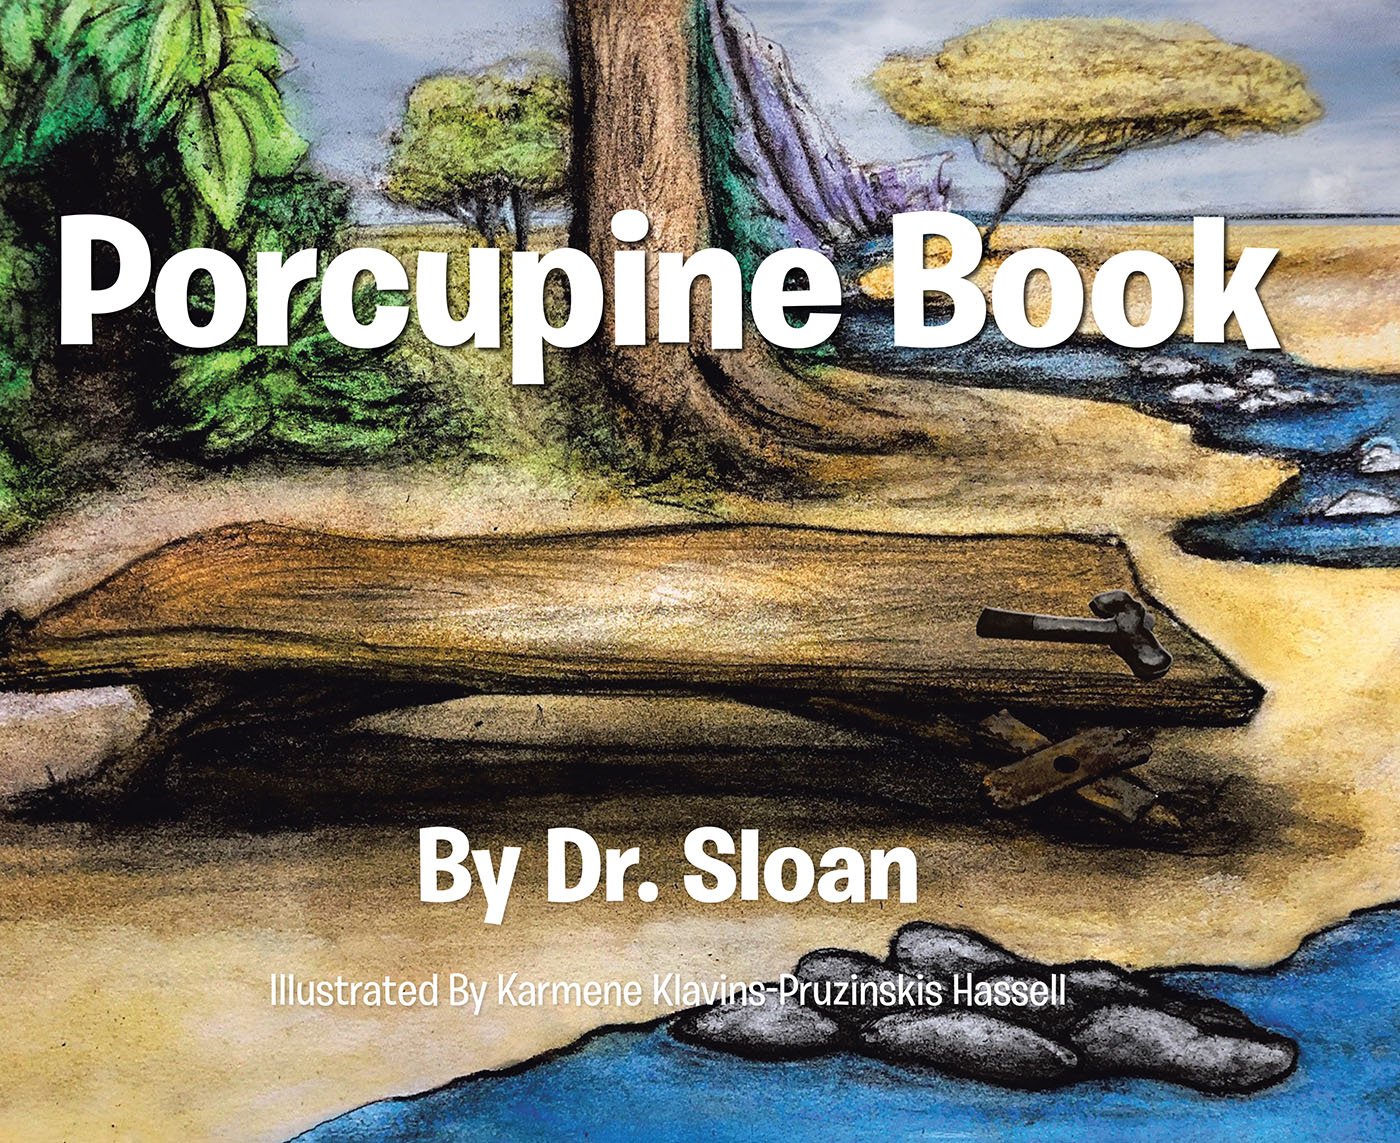 Dr. Sloan’s Newly Released "Porcupine Book" is a Delightful Installment to the Author’s Engaging Trilogy That Explores the Alphabet Through the Creation of Animals